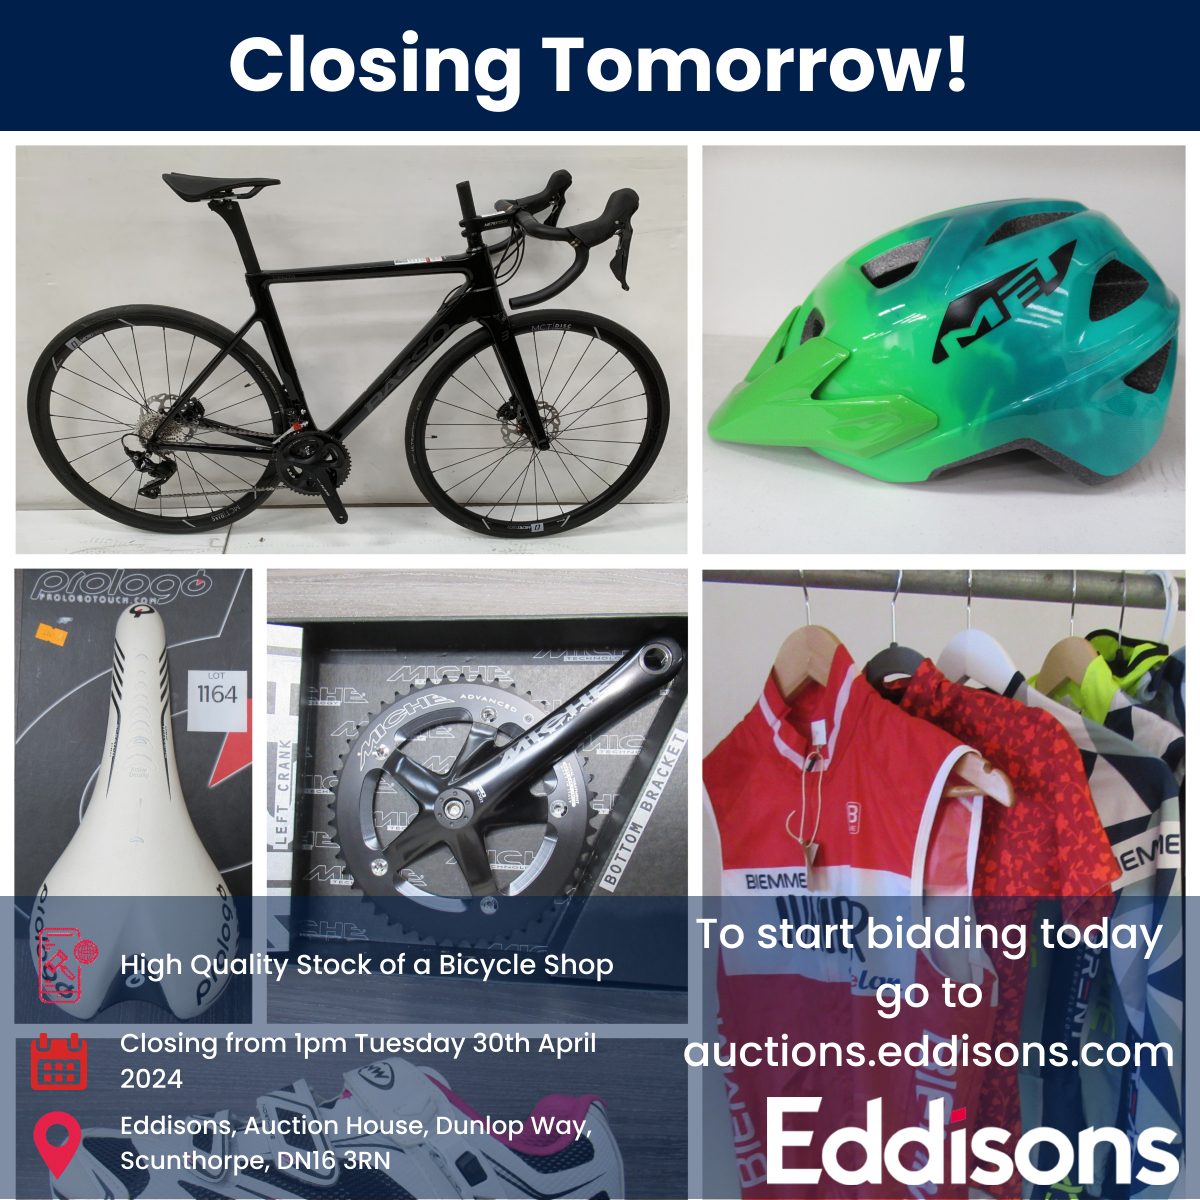 CLOSING TOMORROW!

High Quality Stock of a Bicycle Shop

Location: Scunthorpe, DN16 3RN

Auction closes from 1pm Tuesday 30th April 2024

auctions.eddisons.com/auctions/8889/…

@britishcycling

#britishcycling #auction #bicycle #frame #accessories #parts #tools #scooter #clothing #happybidding